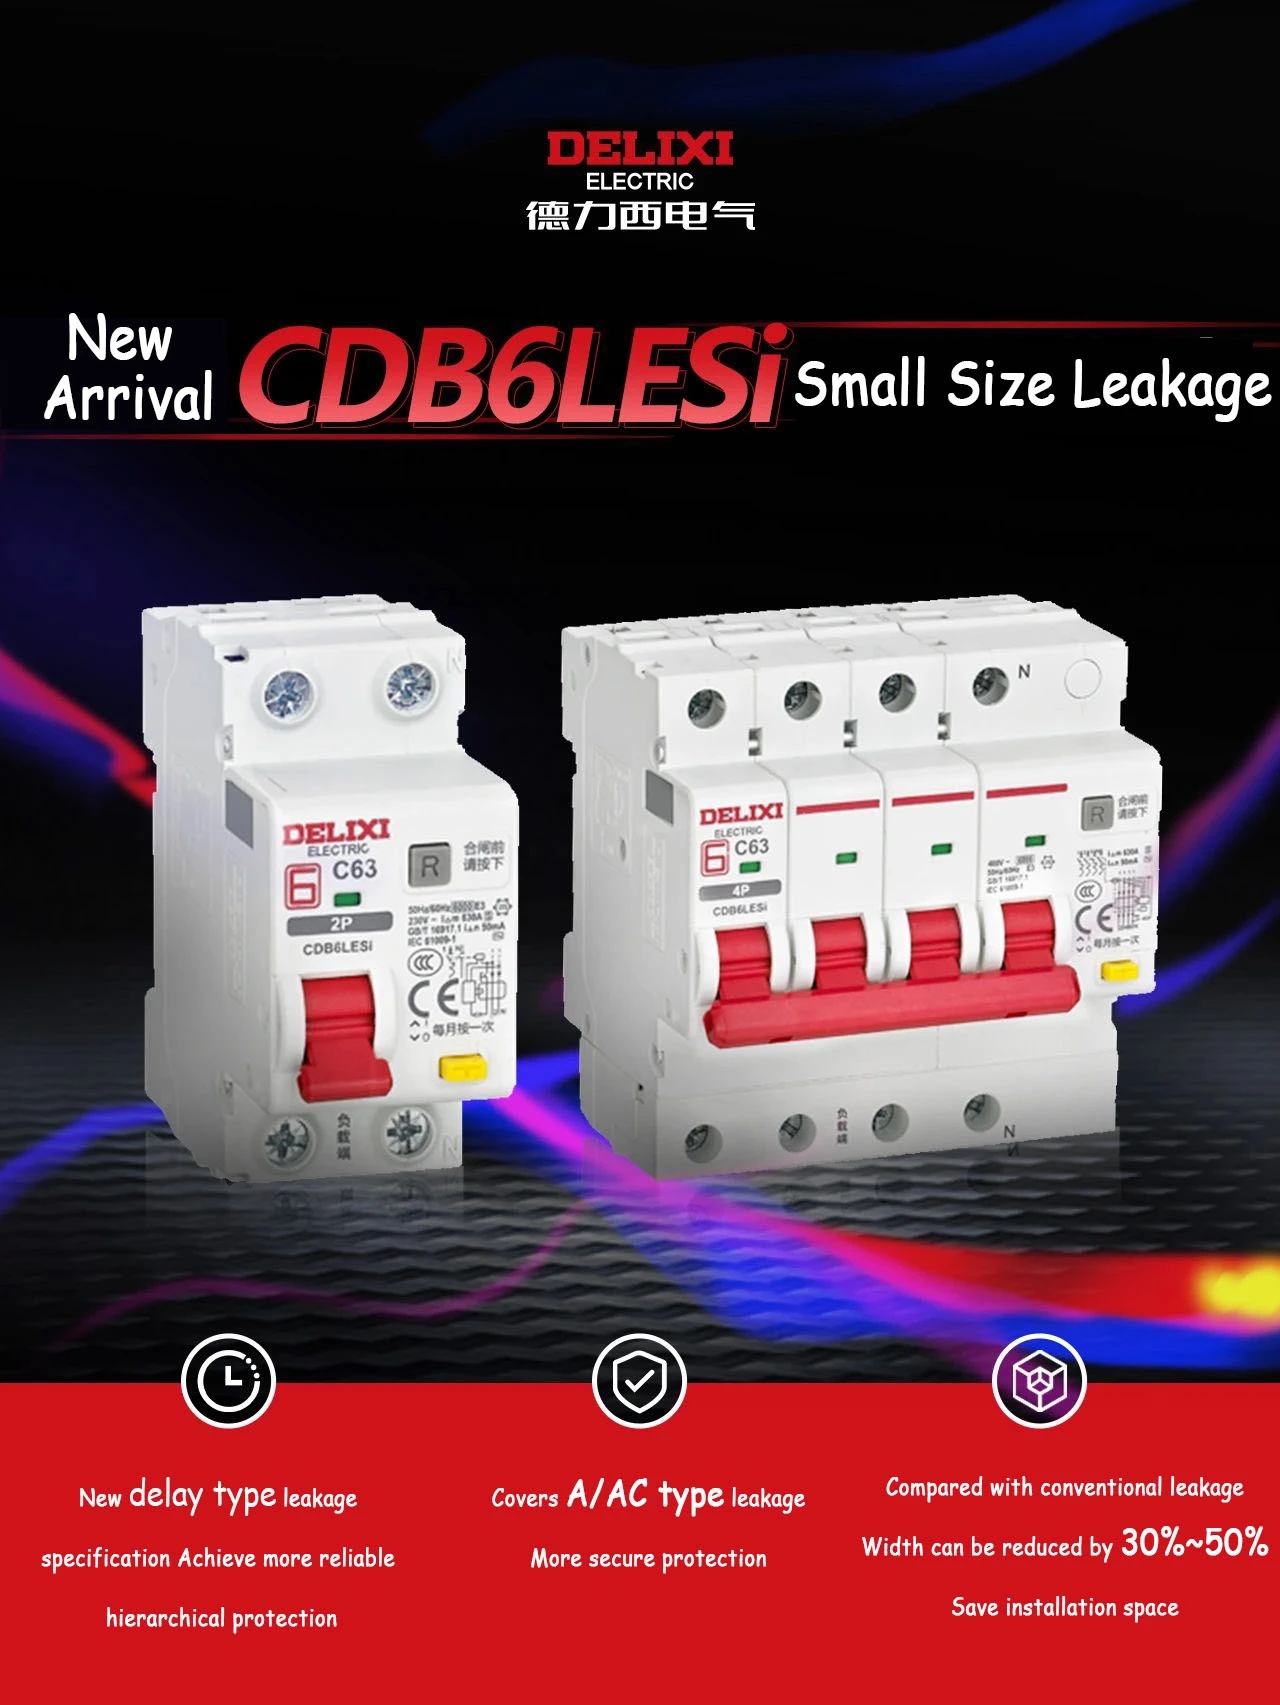 Created With All Efforts, CDB6i Series Miniature Circuit Breakers And Leakage Products Are Newly Upgraded!